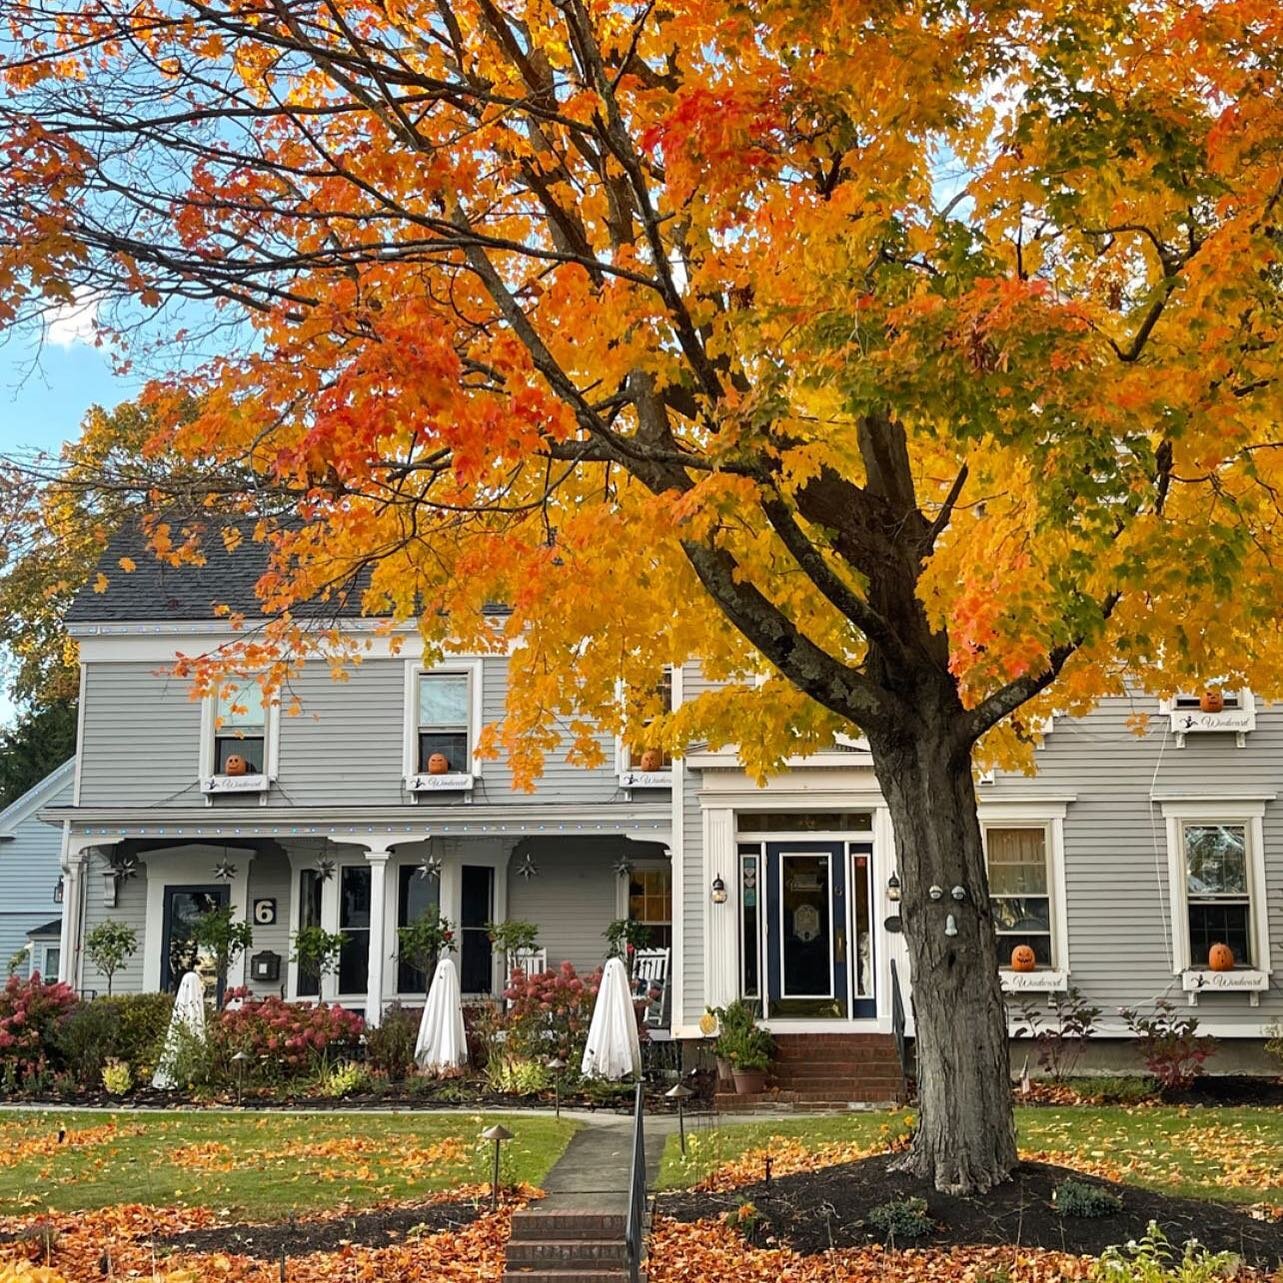 The end of one #season, paves the path for the #beauty of the next one! #fall #fallvibes #bedandbreakfasts #newengland #onlyin207 #mainesucks